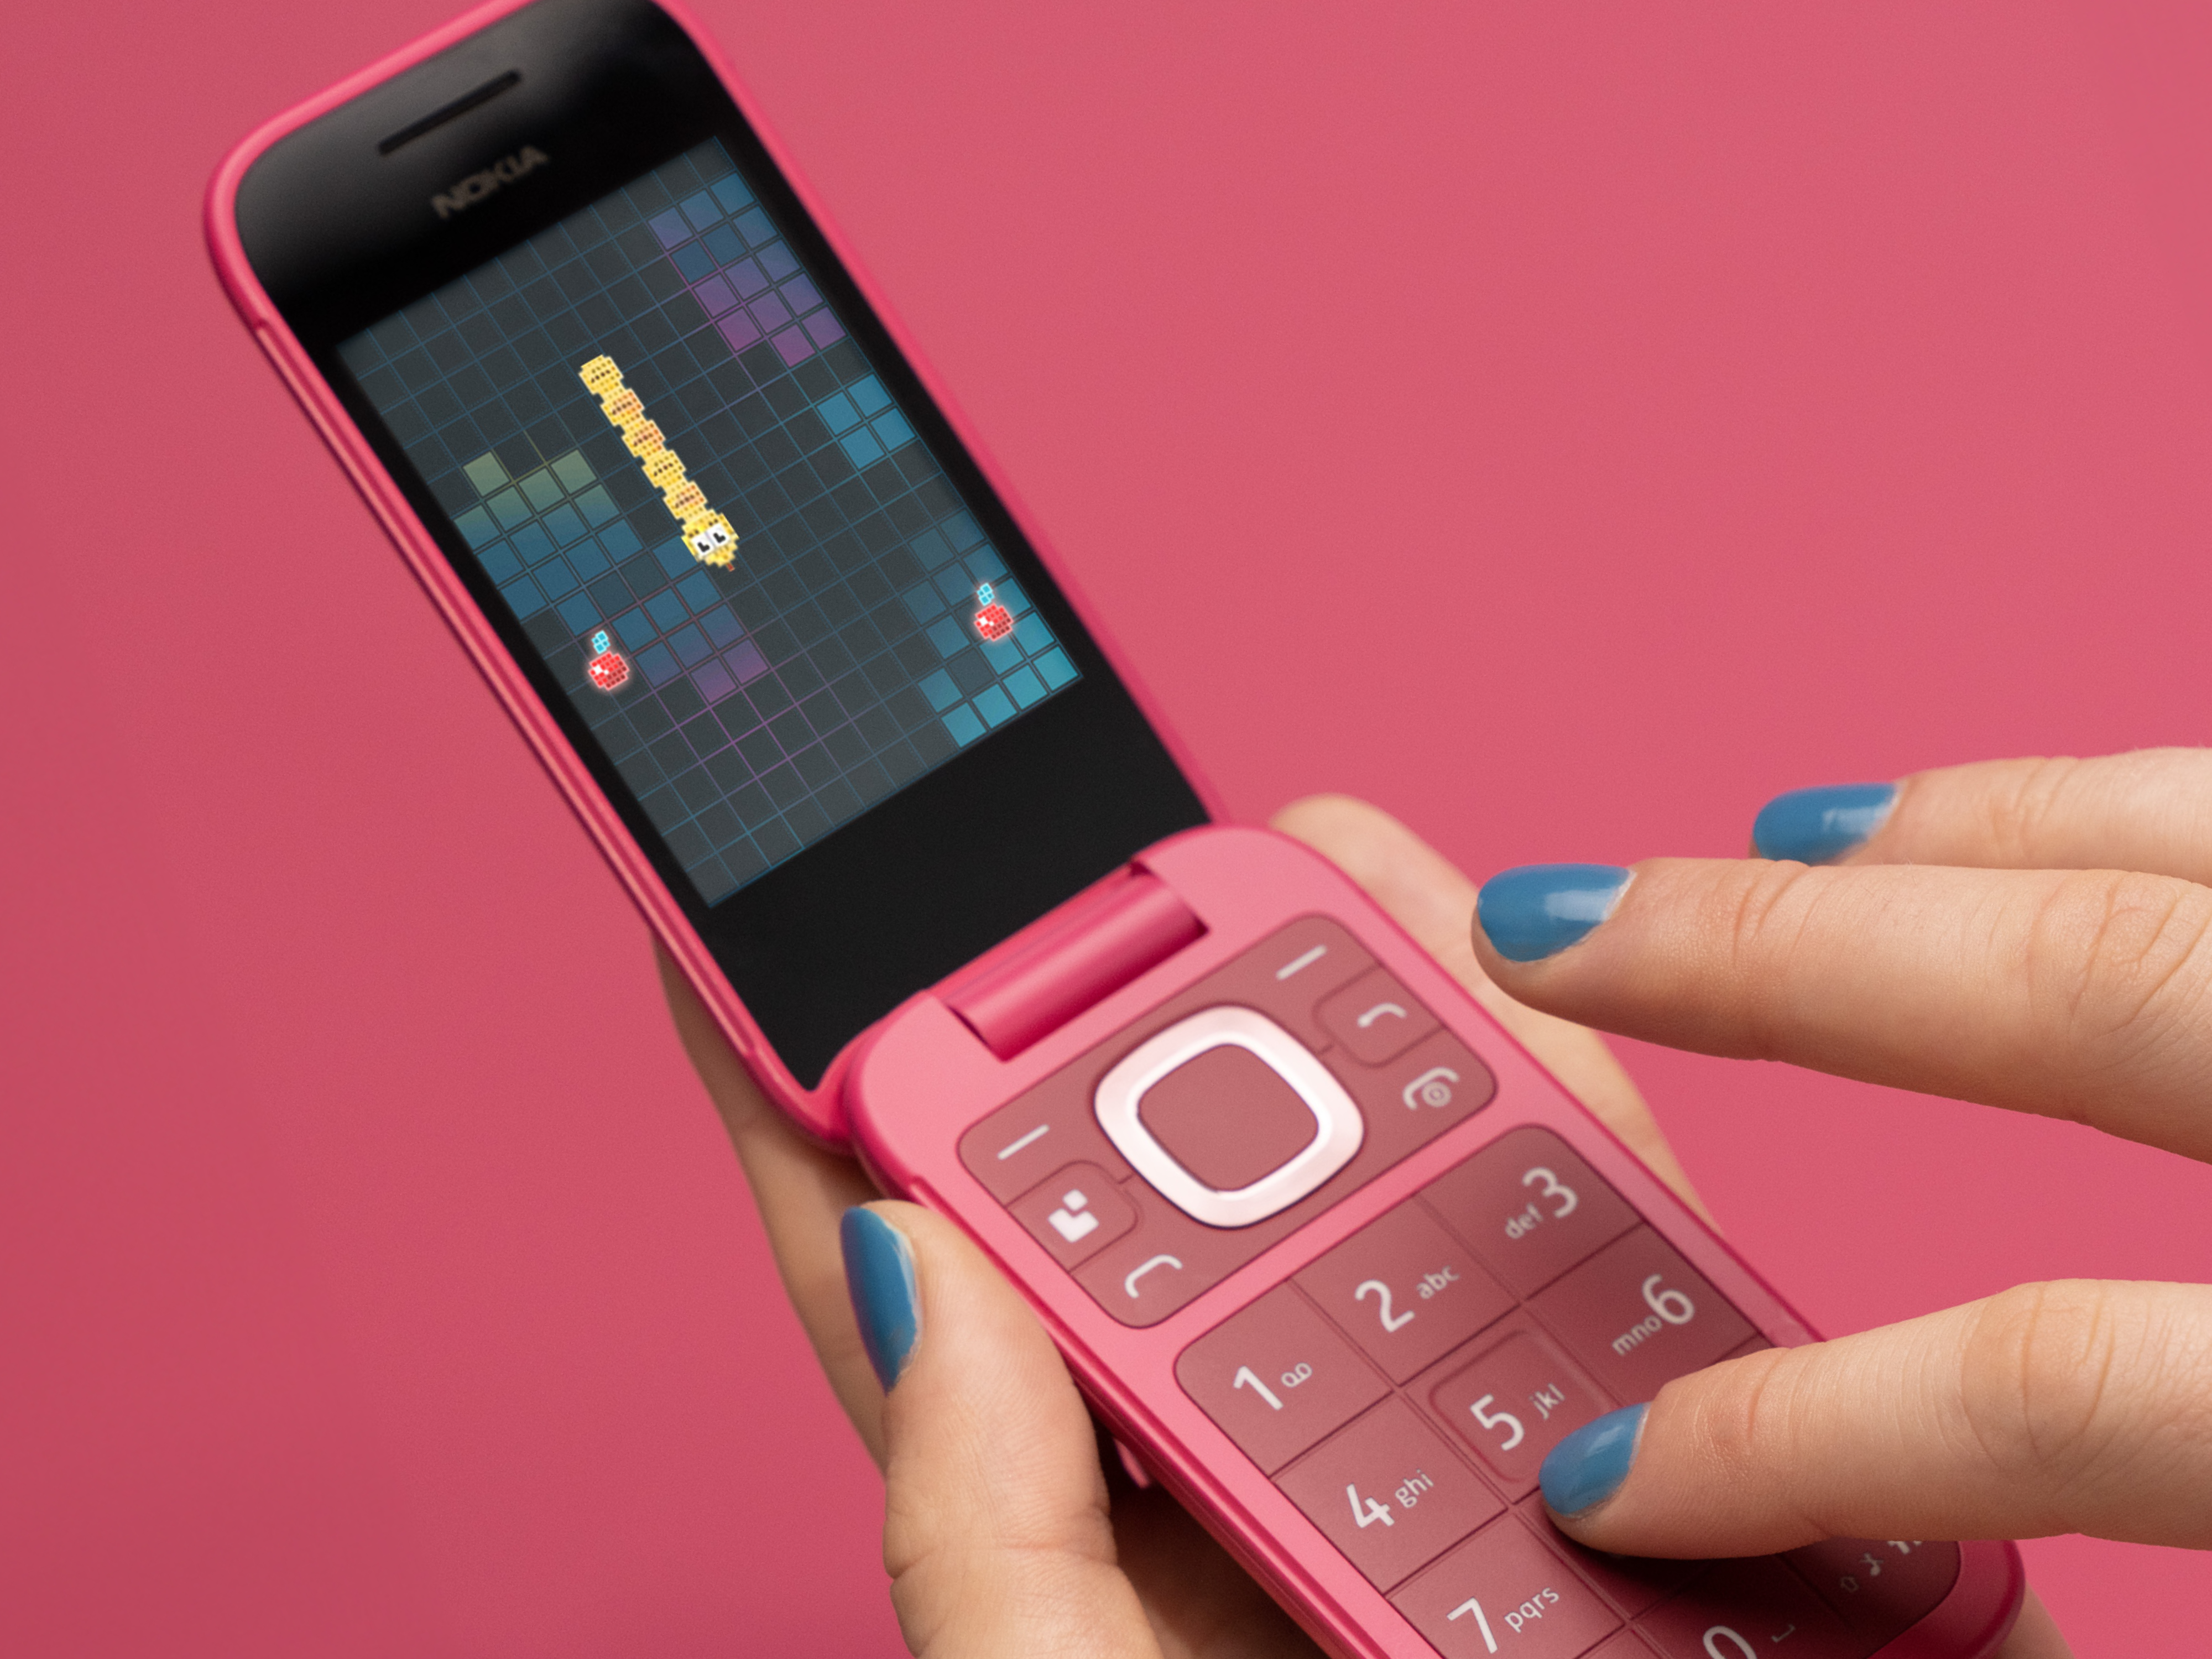 Nokia's Snake, the mobile game that became an entire generation's obsession